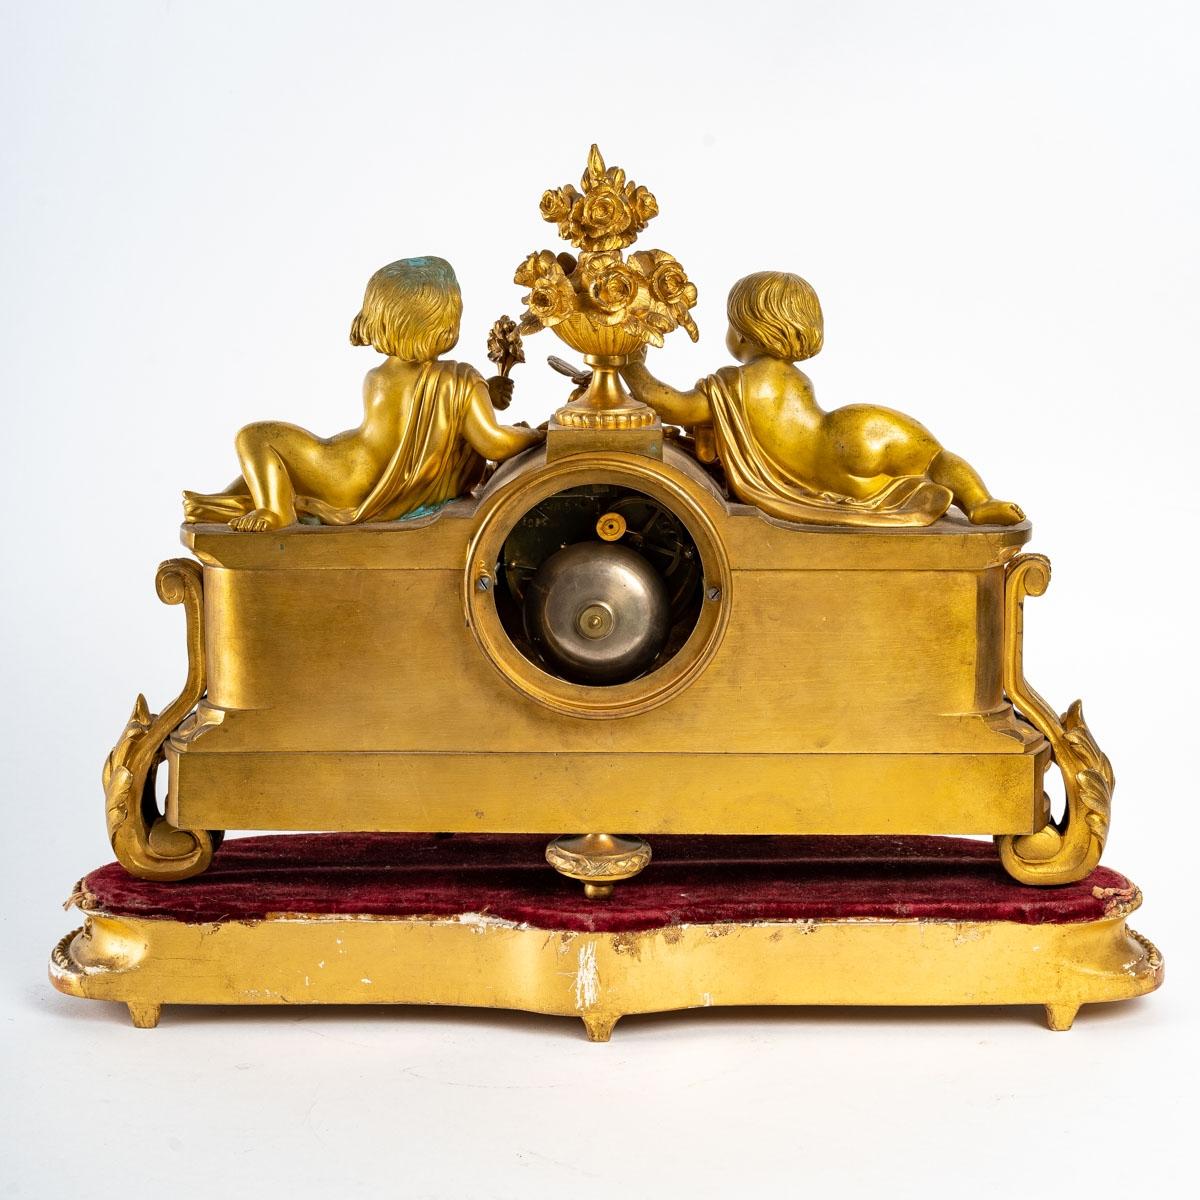 Late 19th Century Gilt bronze and porcelain clock, 19th century